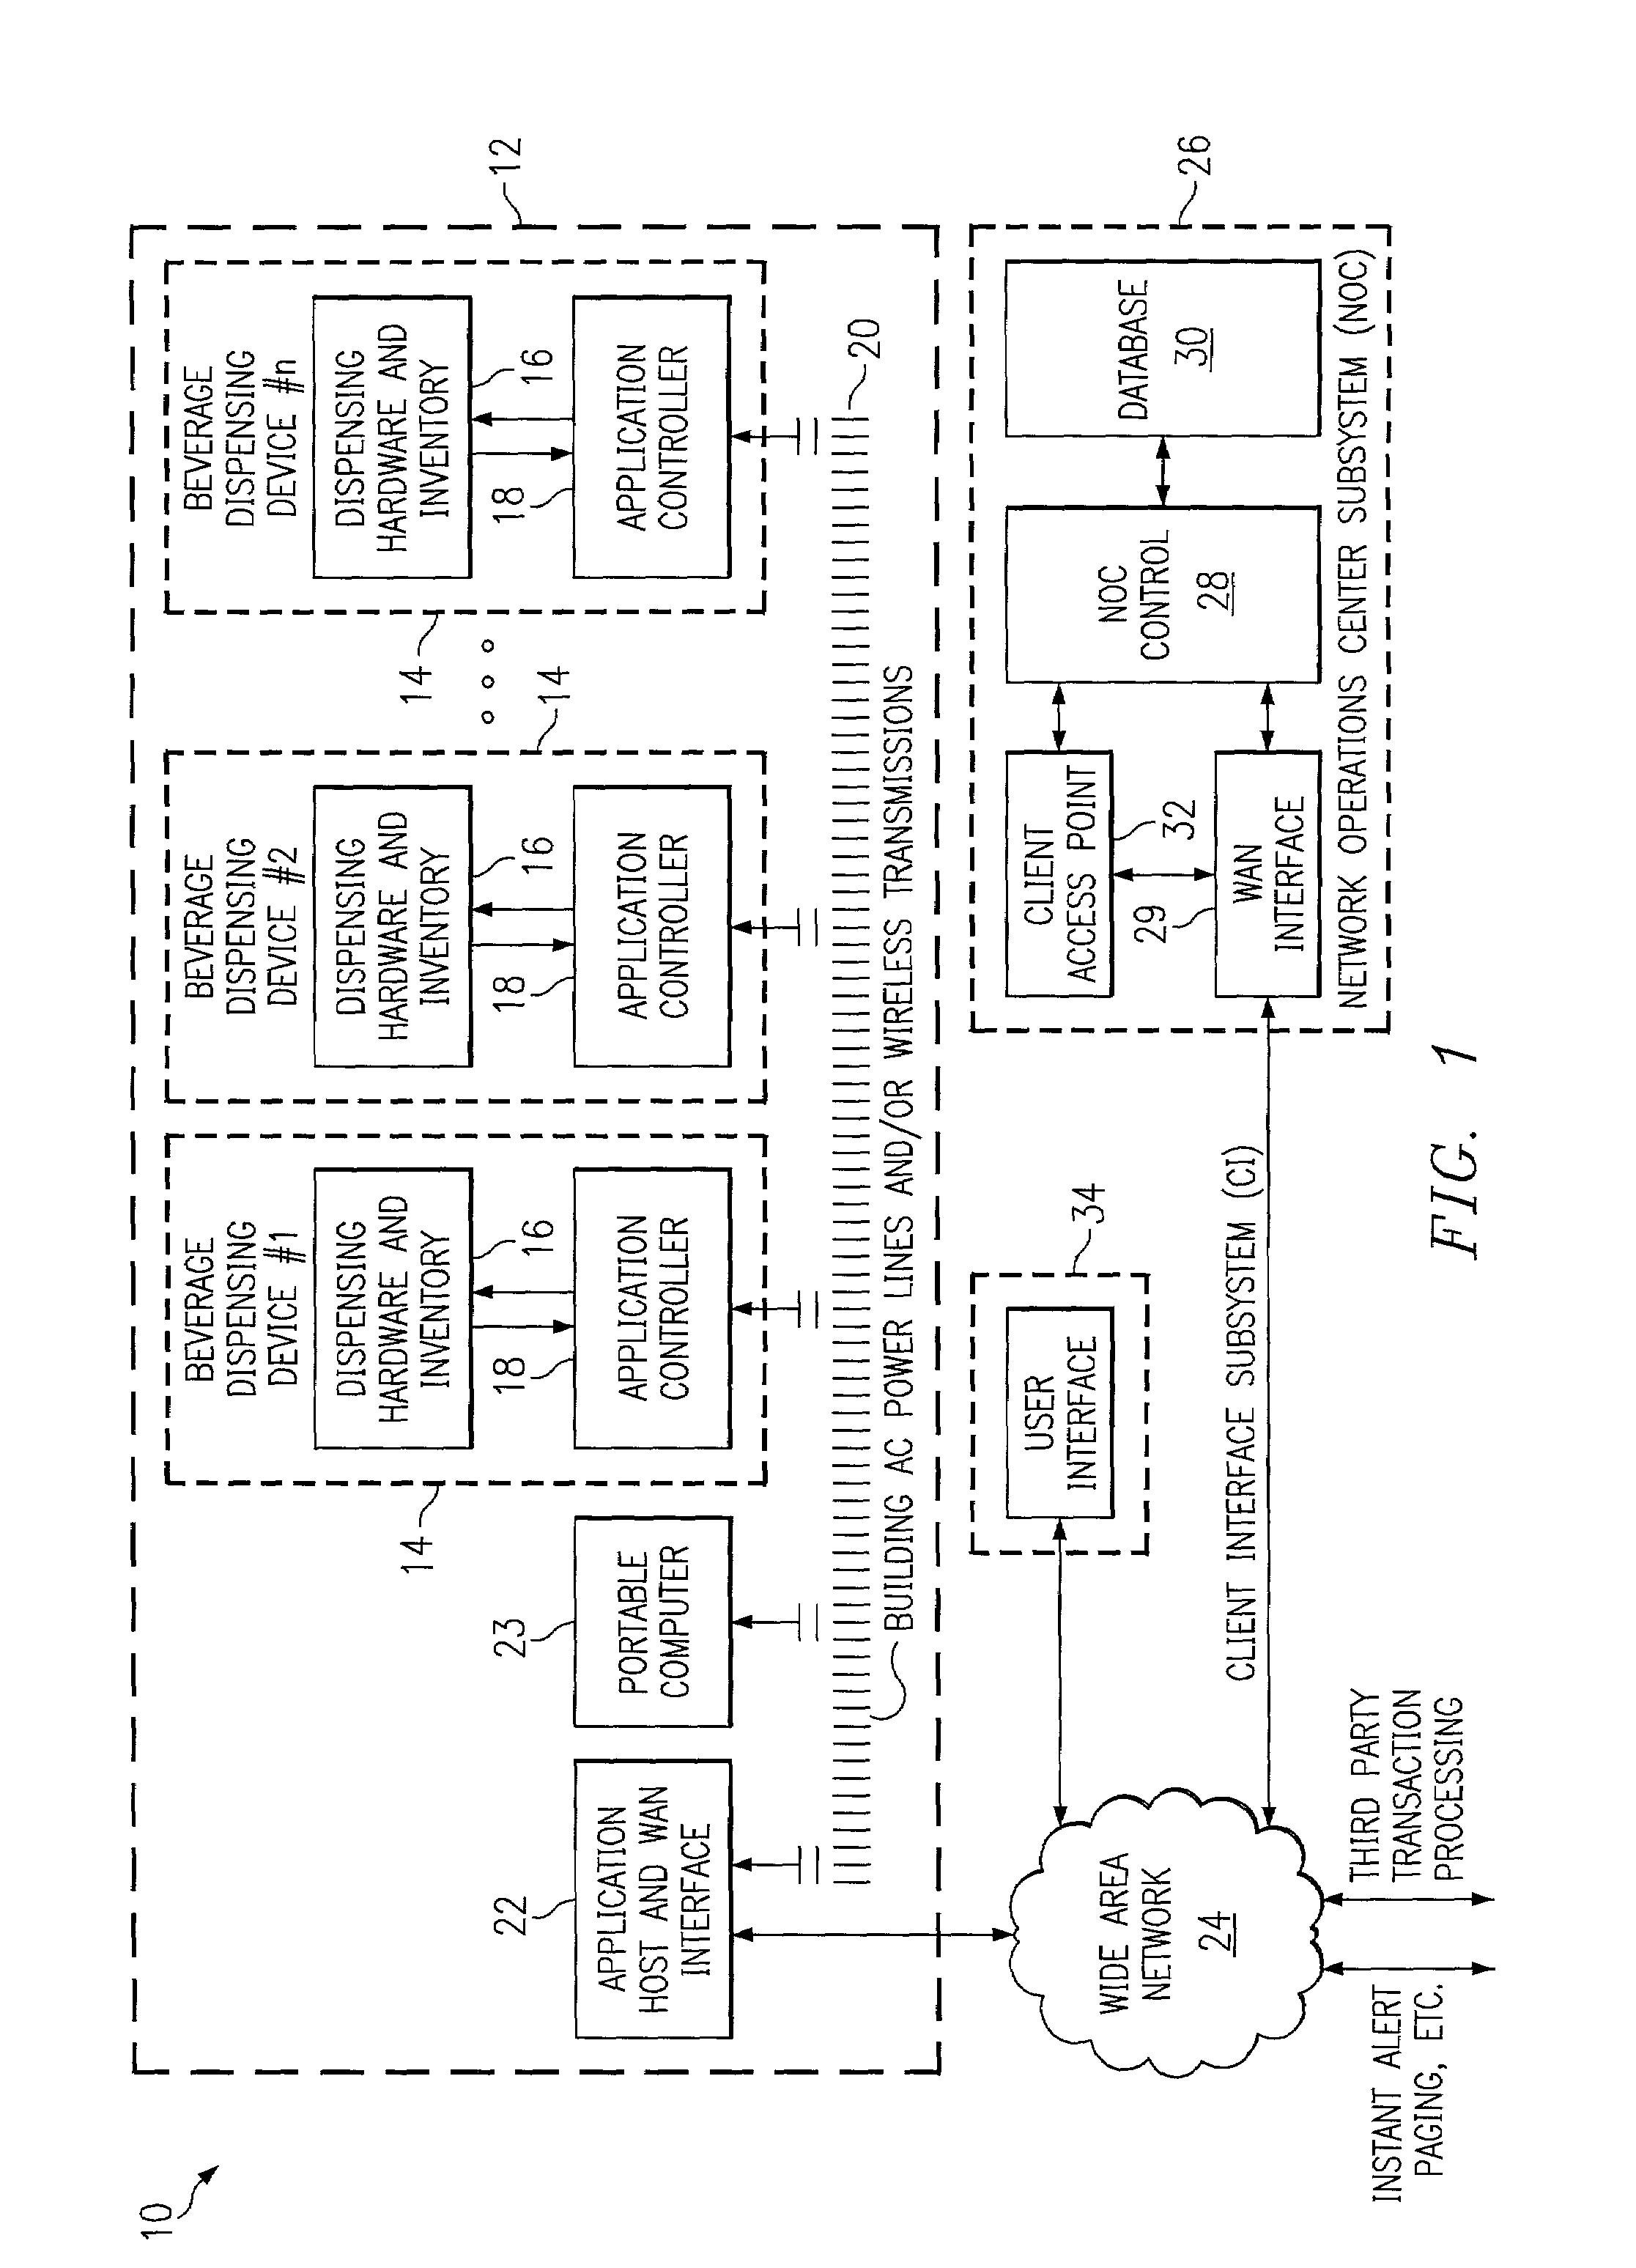 System and method for monitoring and control of beverage dispensing equipment